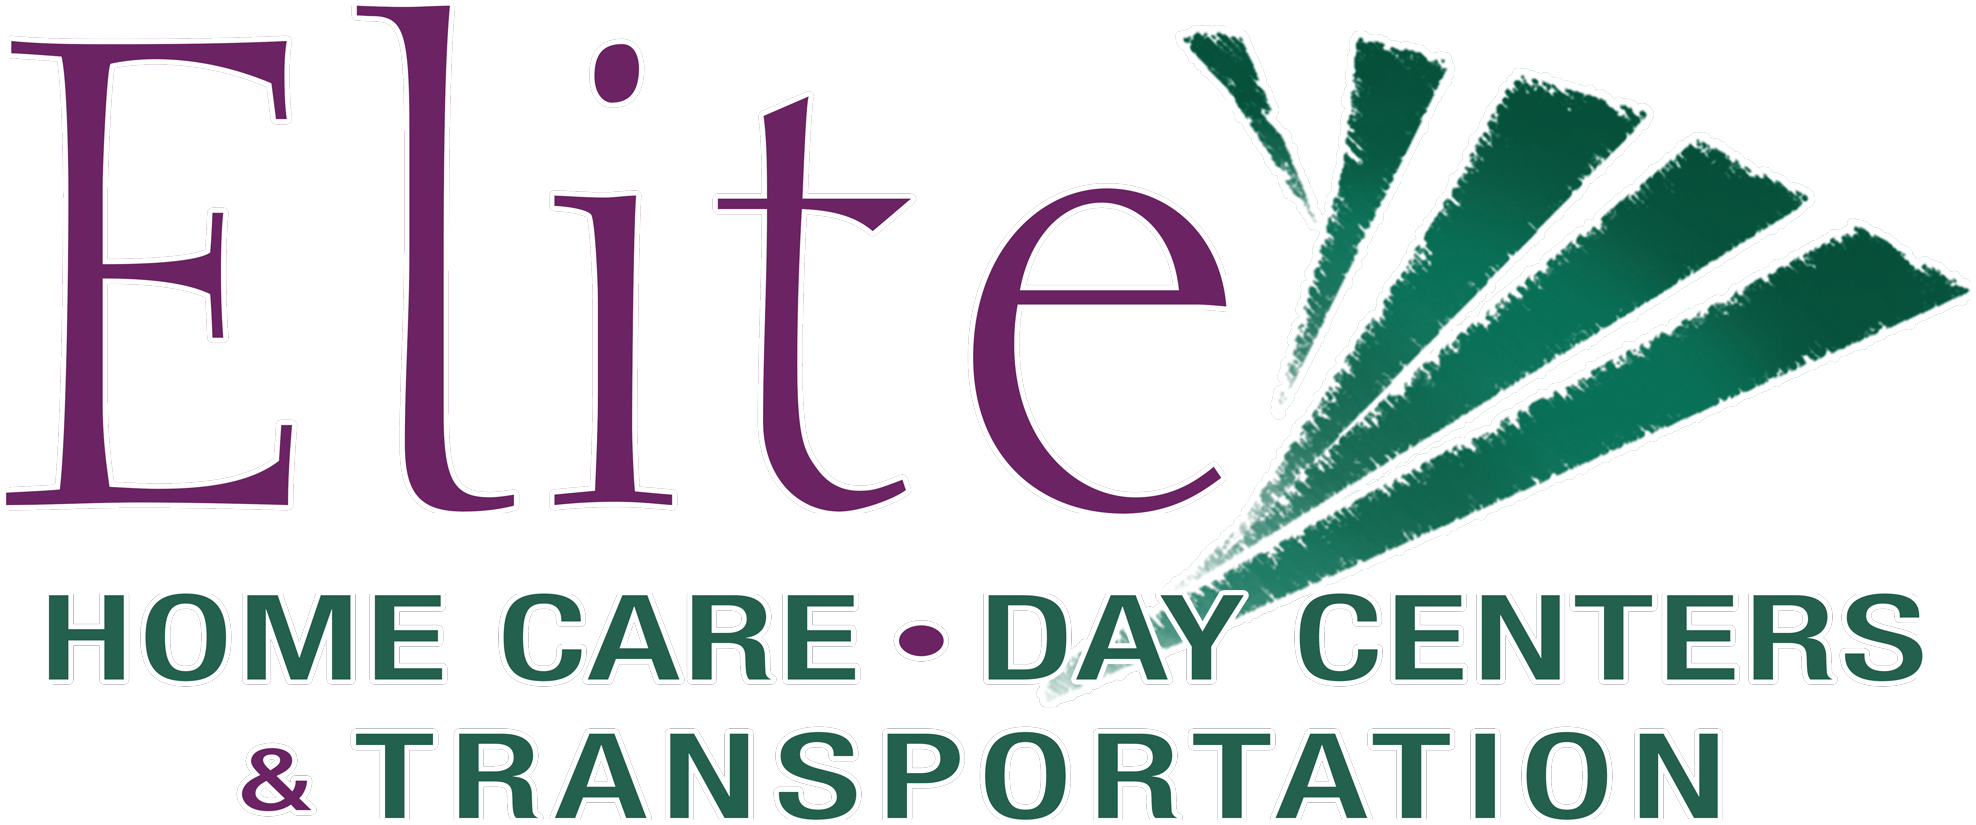 Elite Home Care and Day Centers